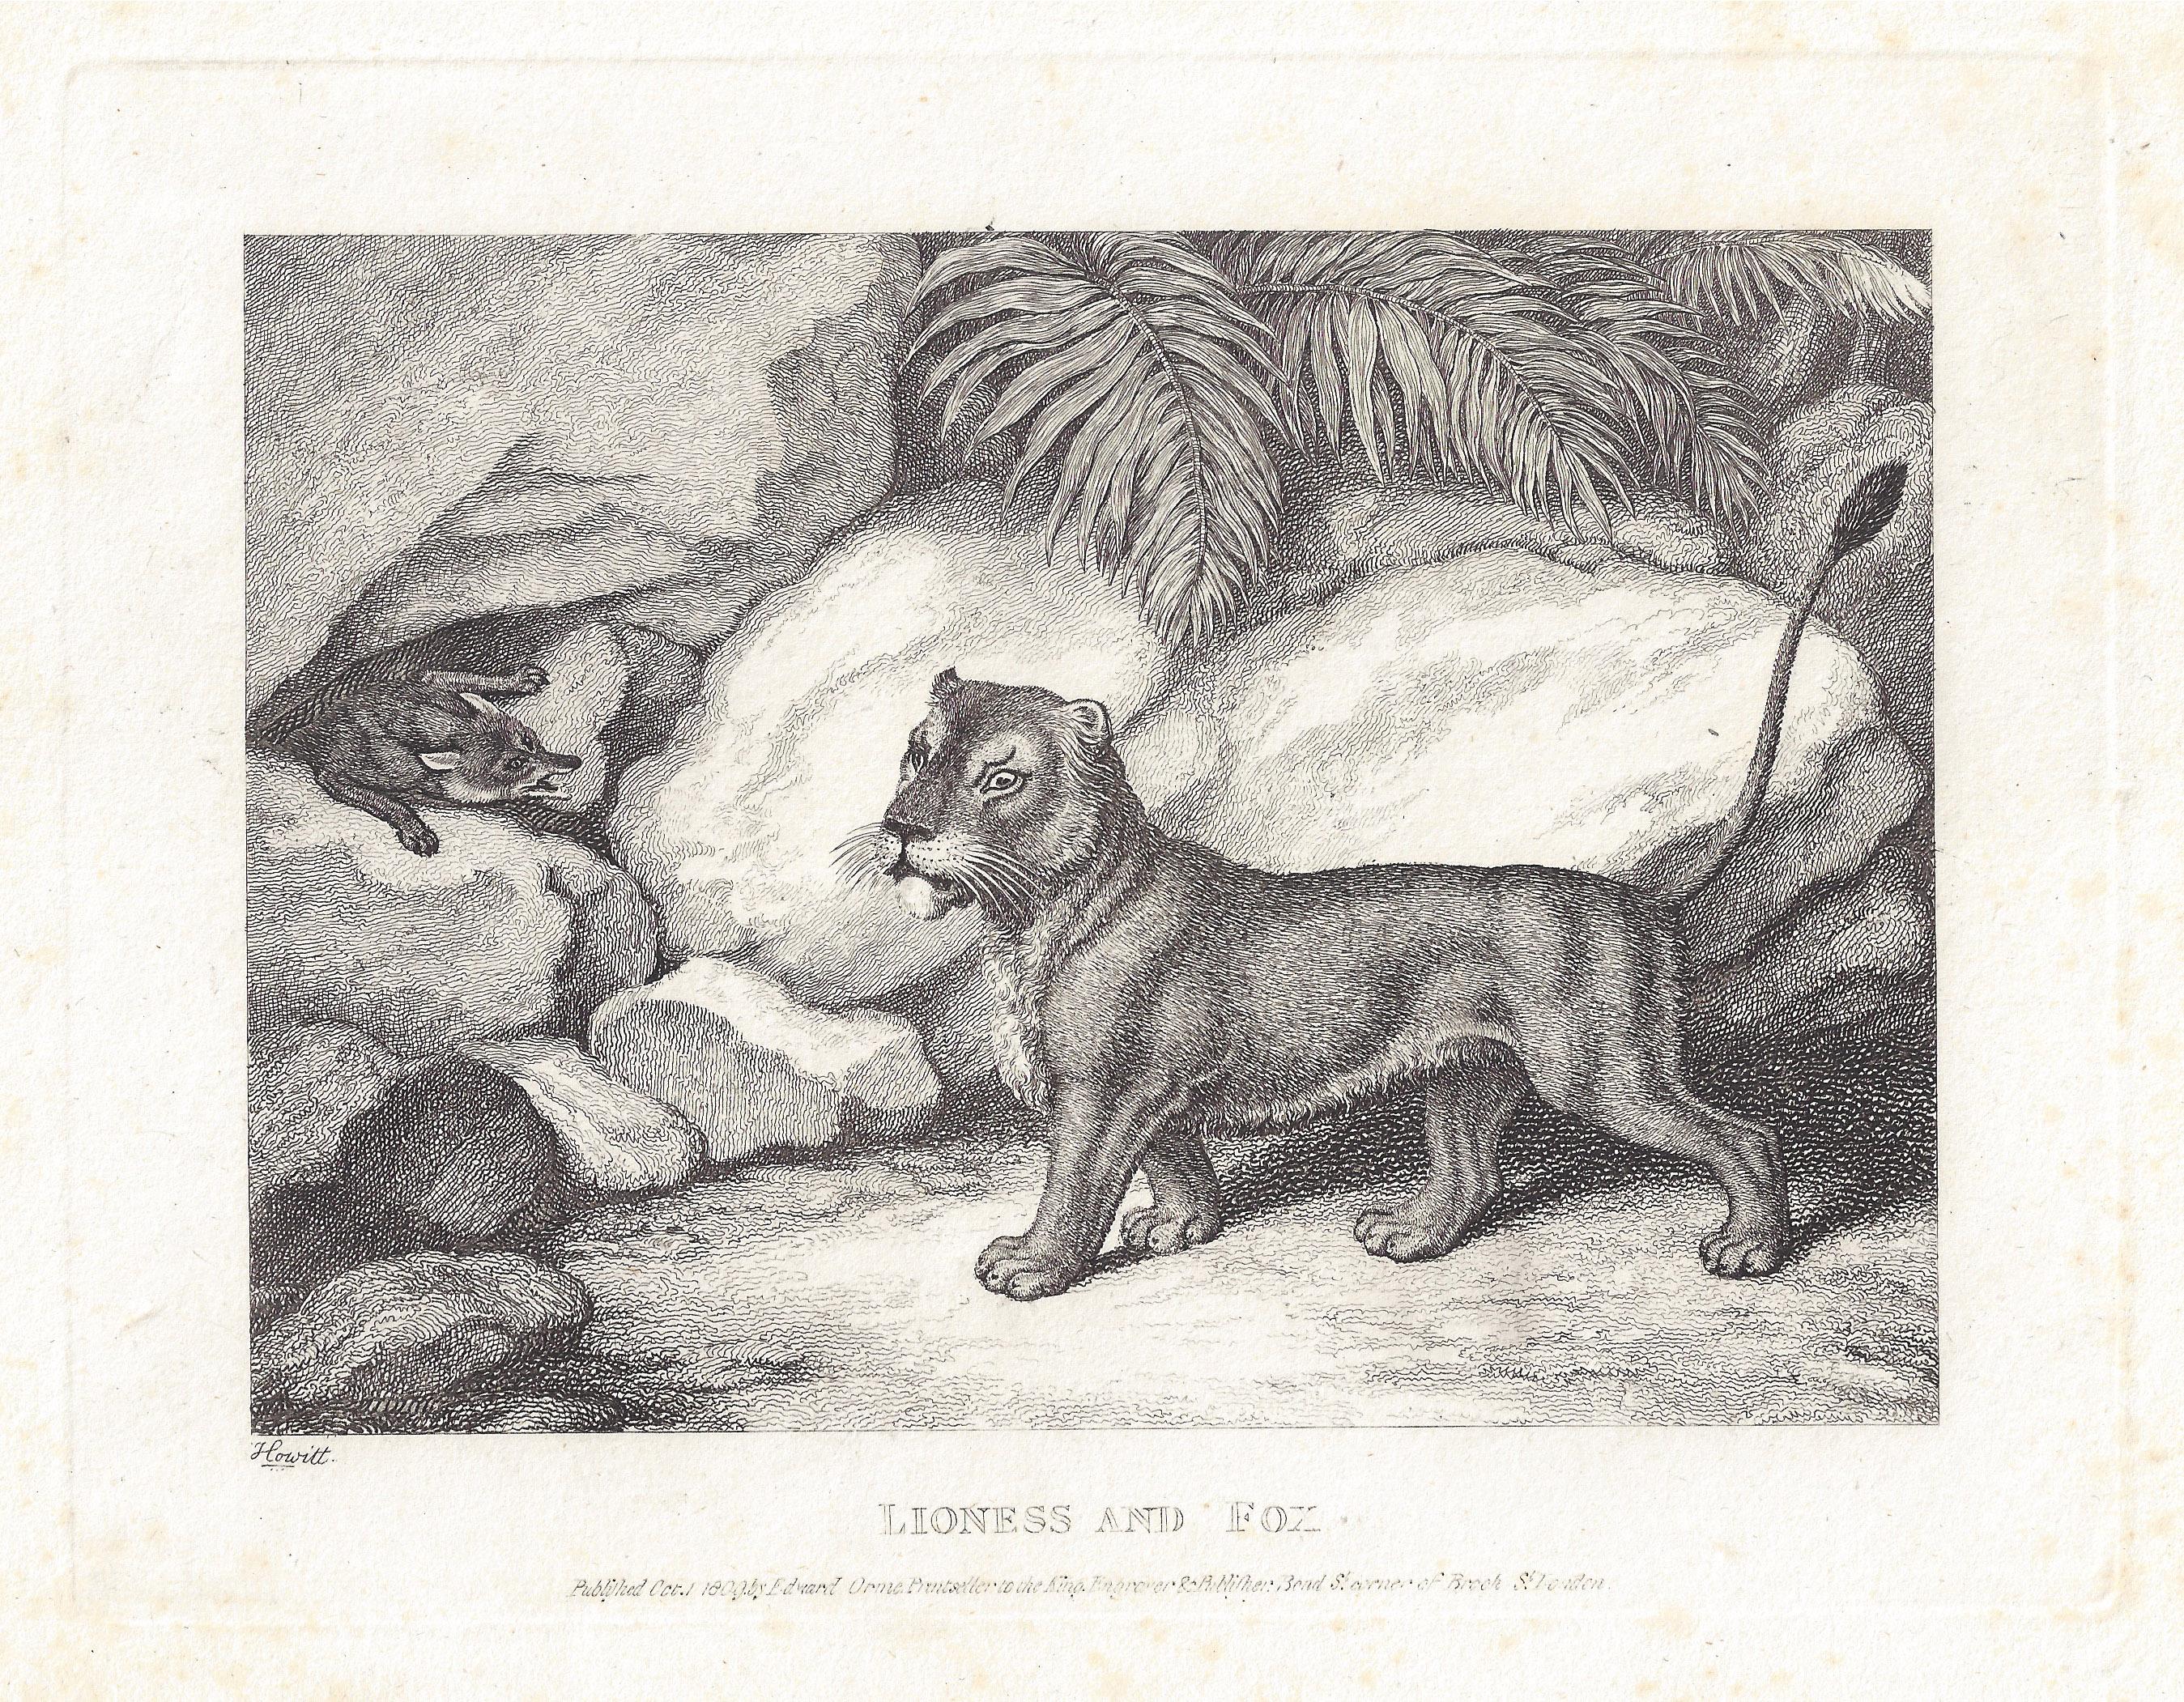 Lioness and Fox, antique animal fable etching by Samuel Howitt